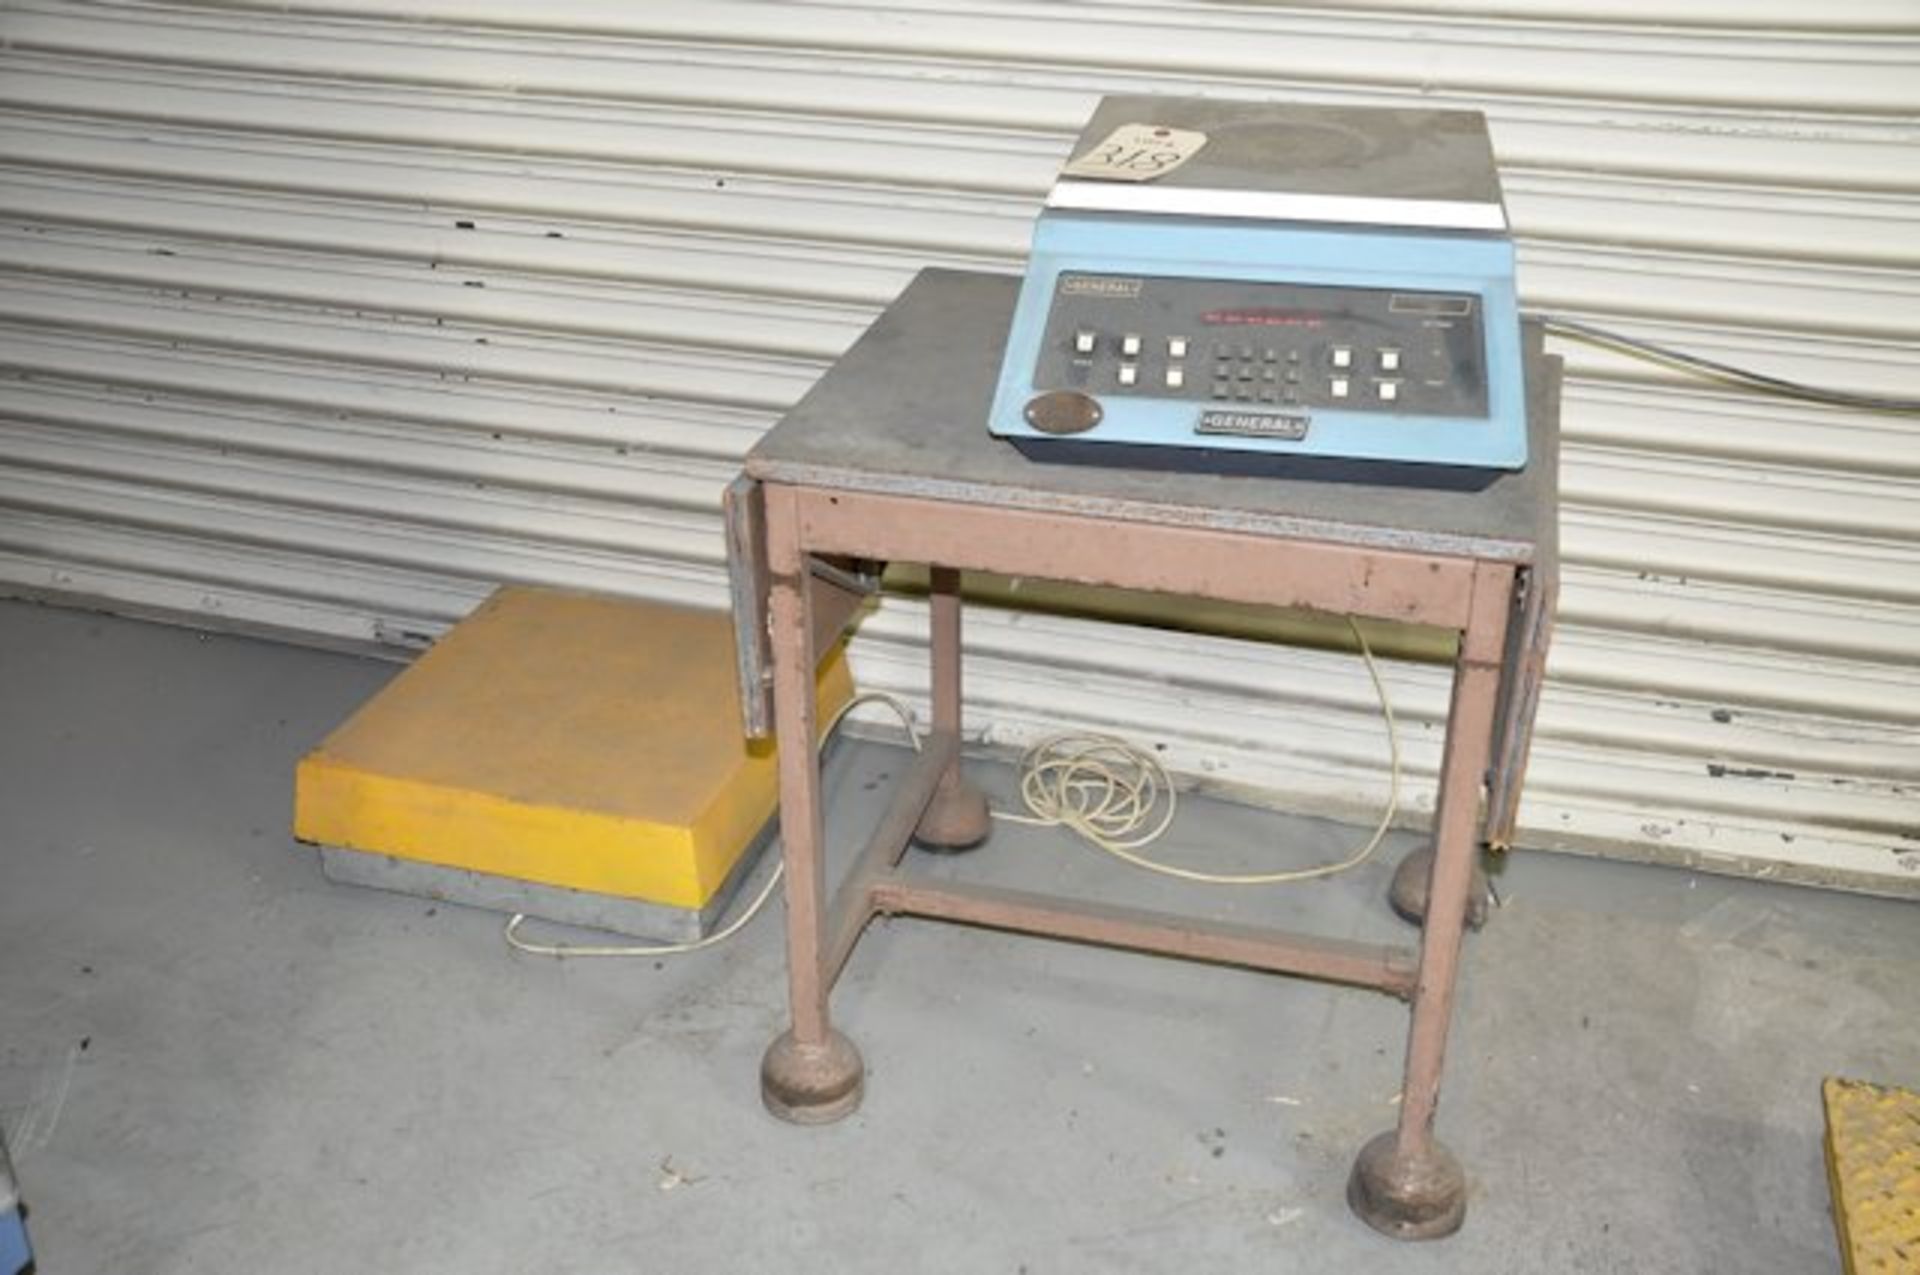 18" x 18" Platform Scale with GENERAL Model MLC/SS-II-A 50-Lbs. Capacity Scale